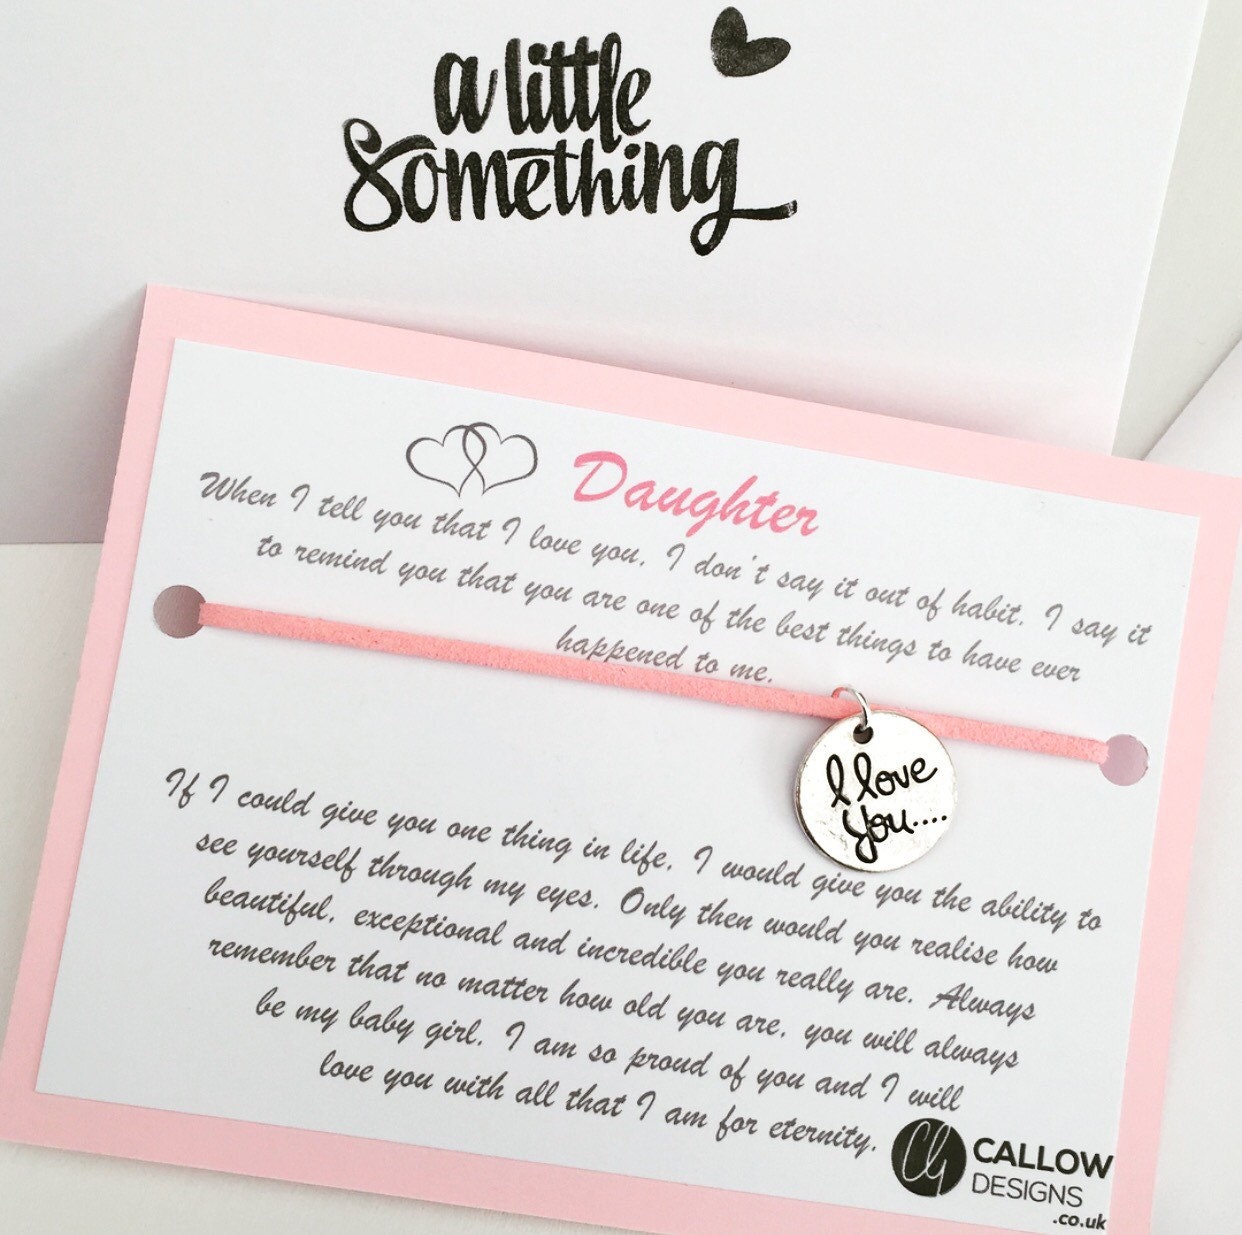 I Love You My Daughter Greetings Card & Charm Bracelet Meaning Quote Pink Silver Friendship Callow Designs Through My Eyes Baby Girl Mother